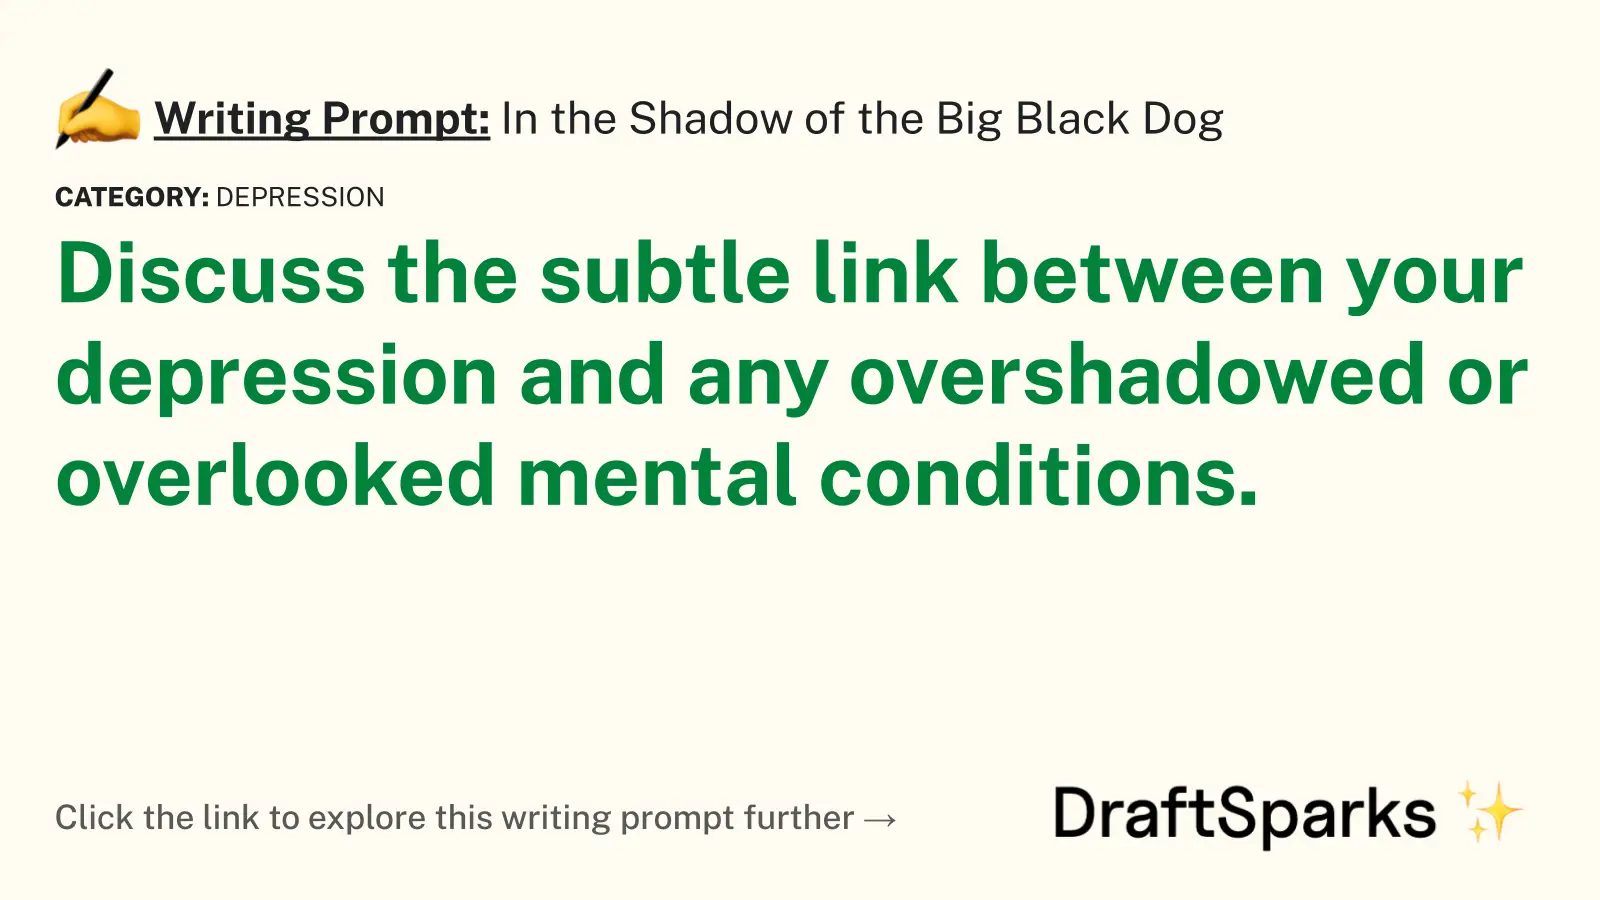 In the Shadow of the Big Black Dog